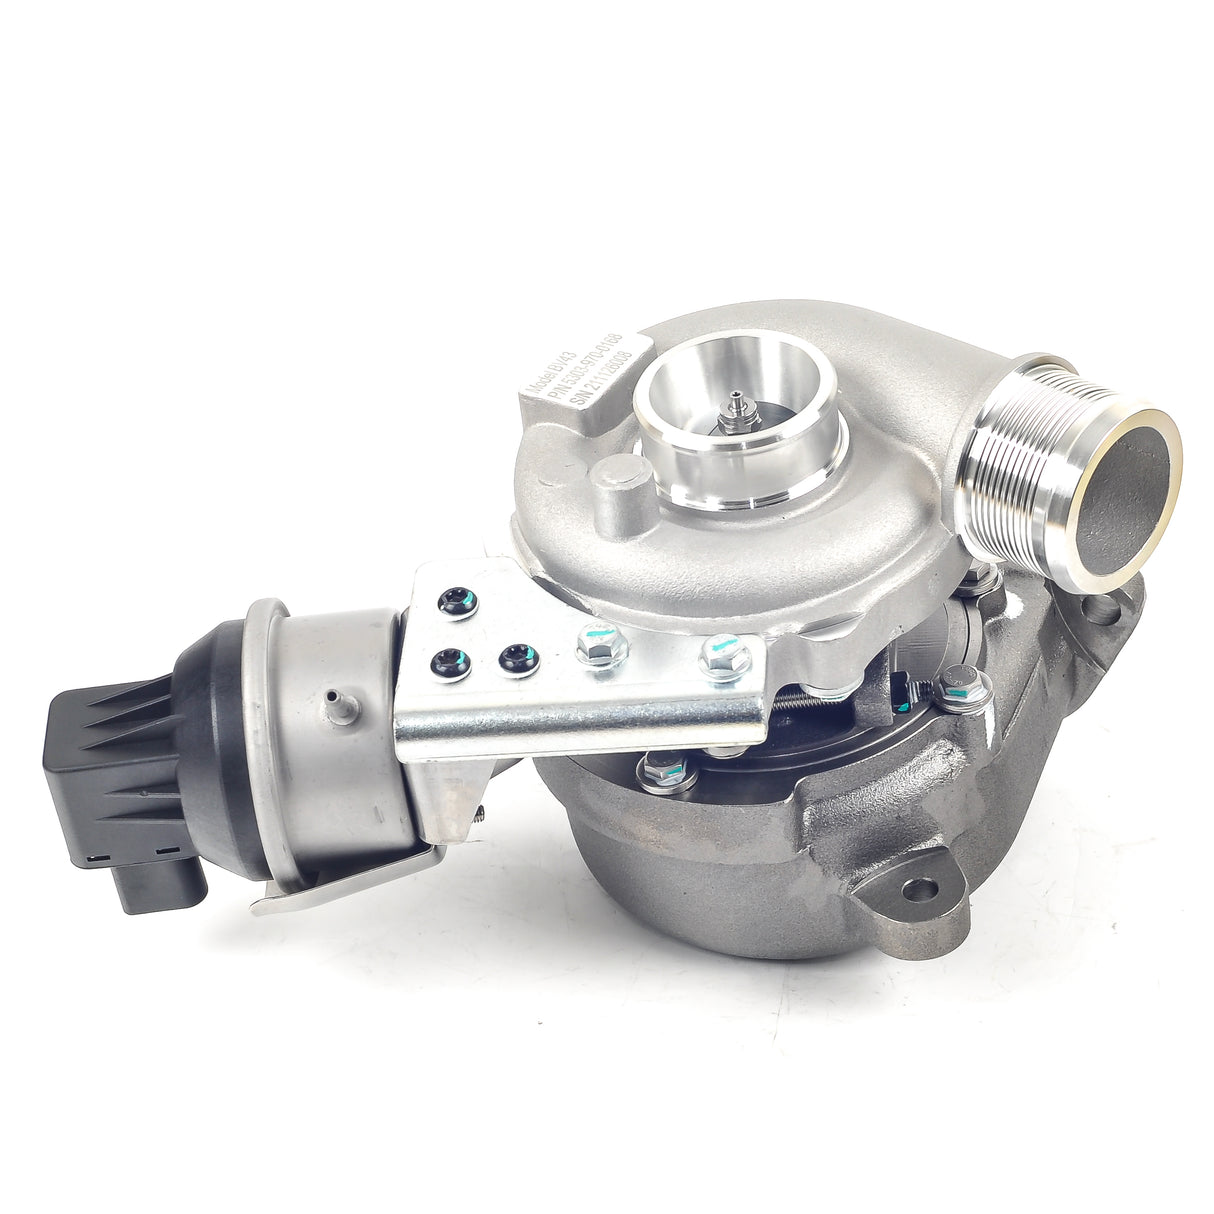 Jrone Turbocharger for Great Wall Haval H6 V200 GW4D20 2.0L